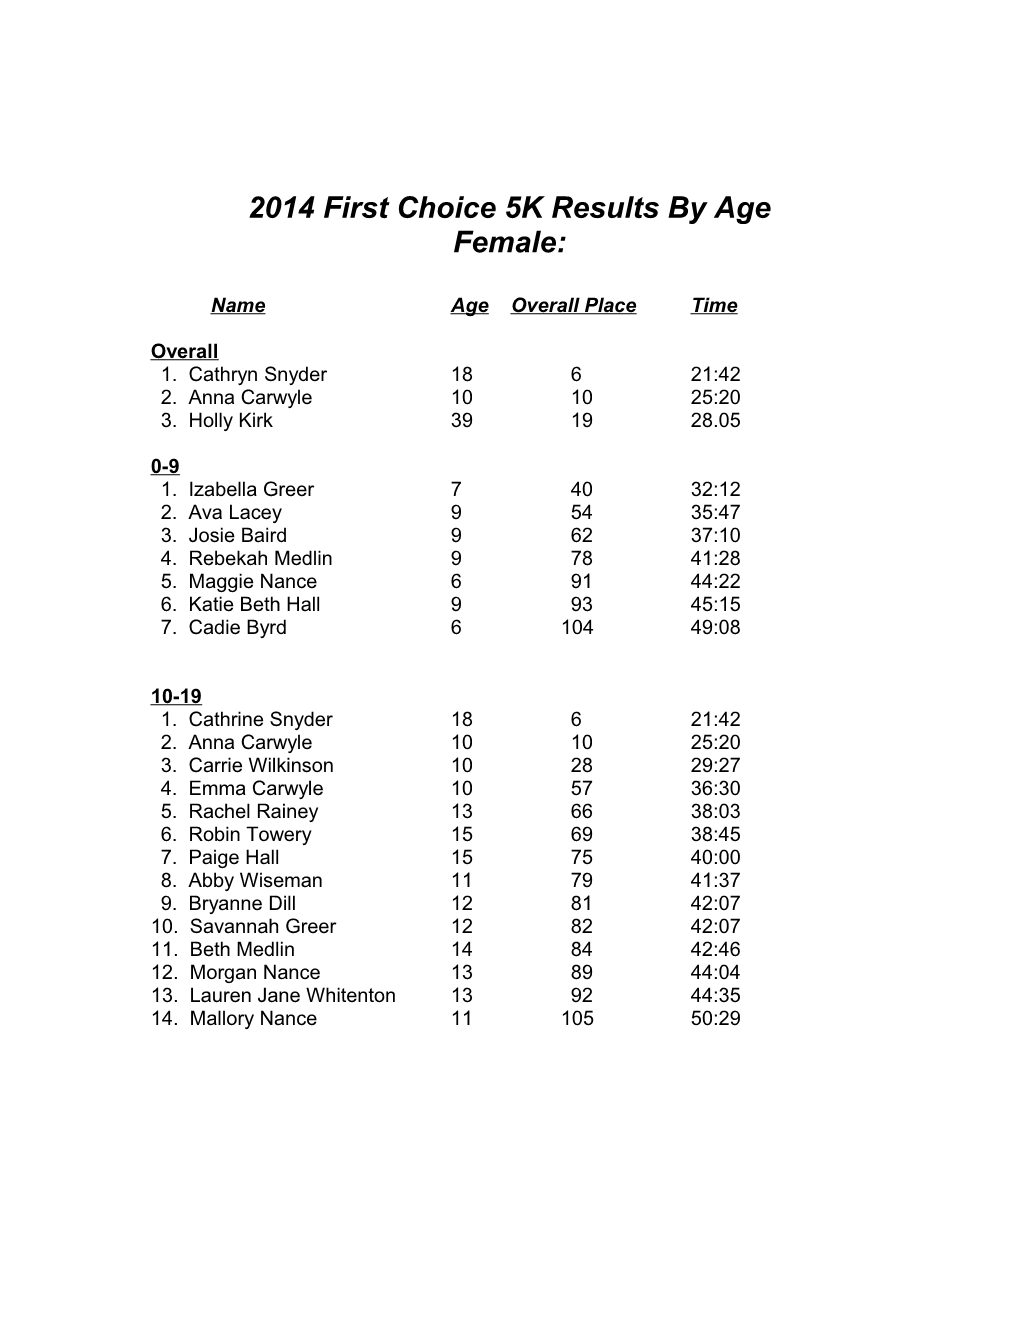 2012 First Choice 5K Results by Age